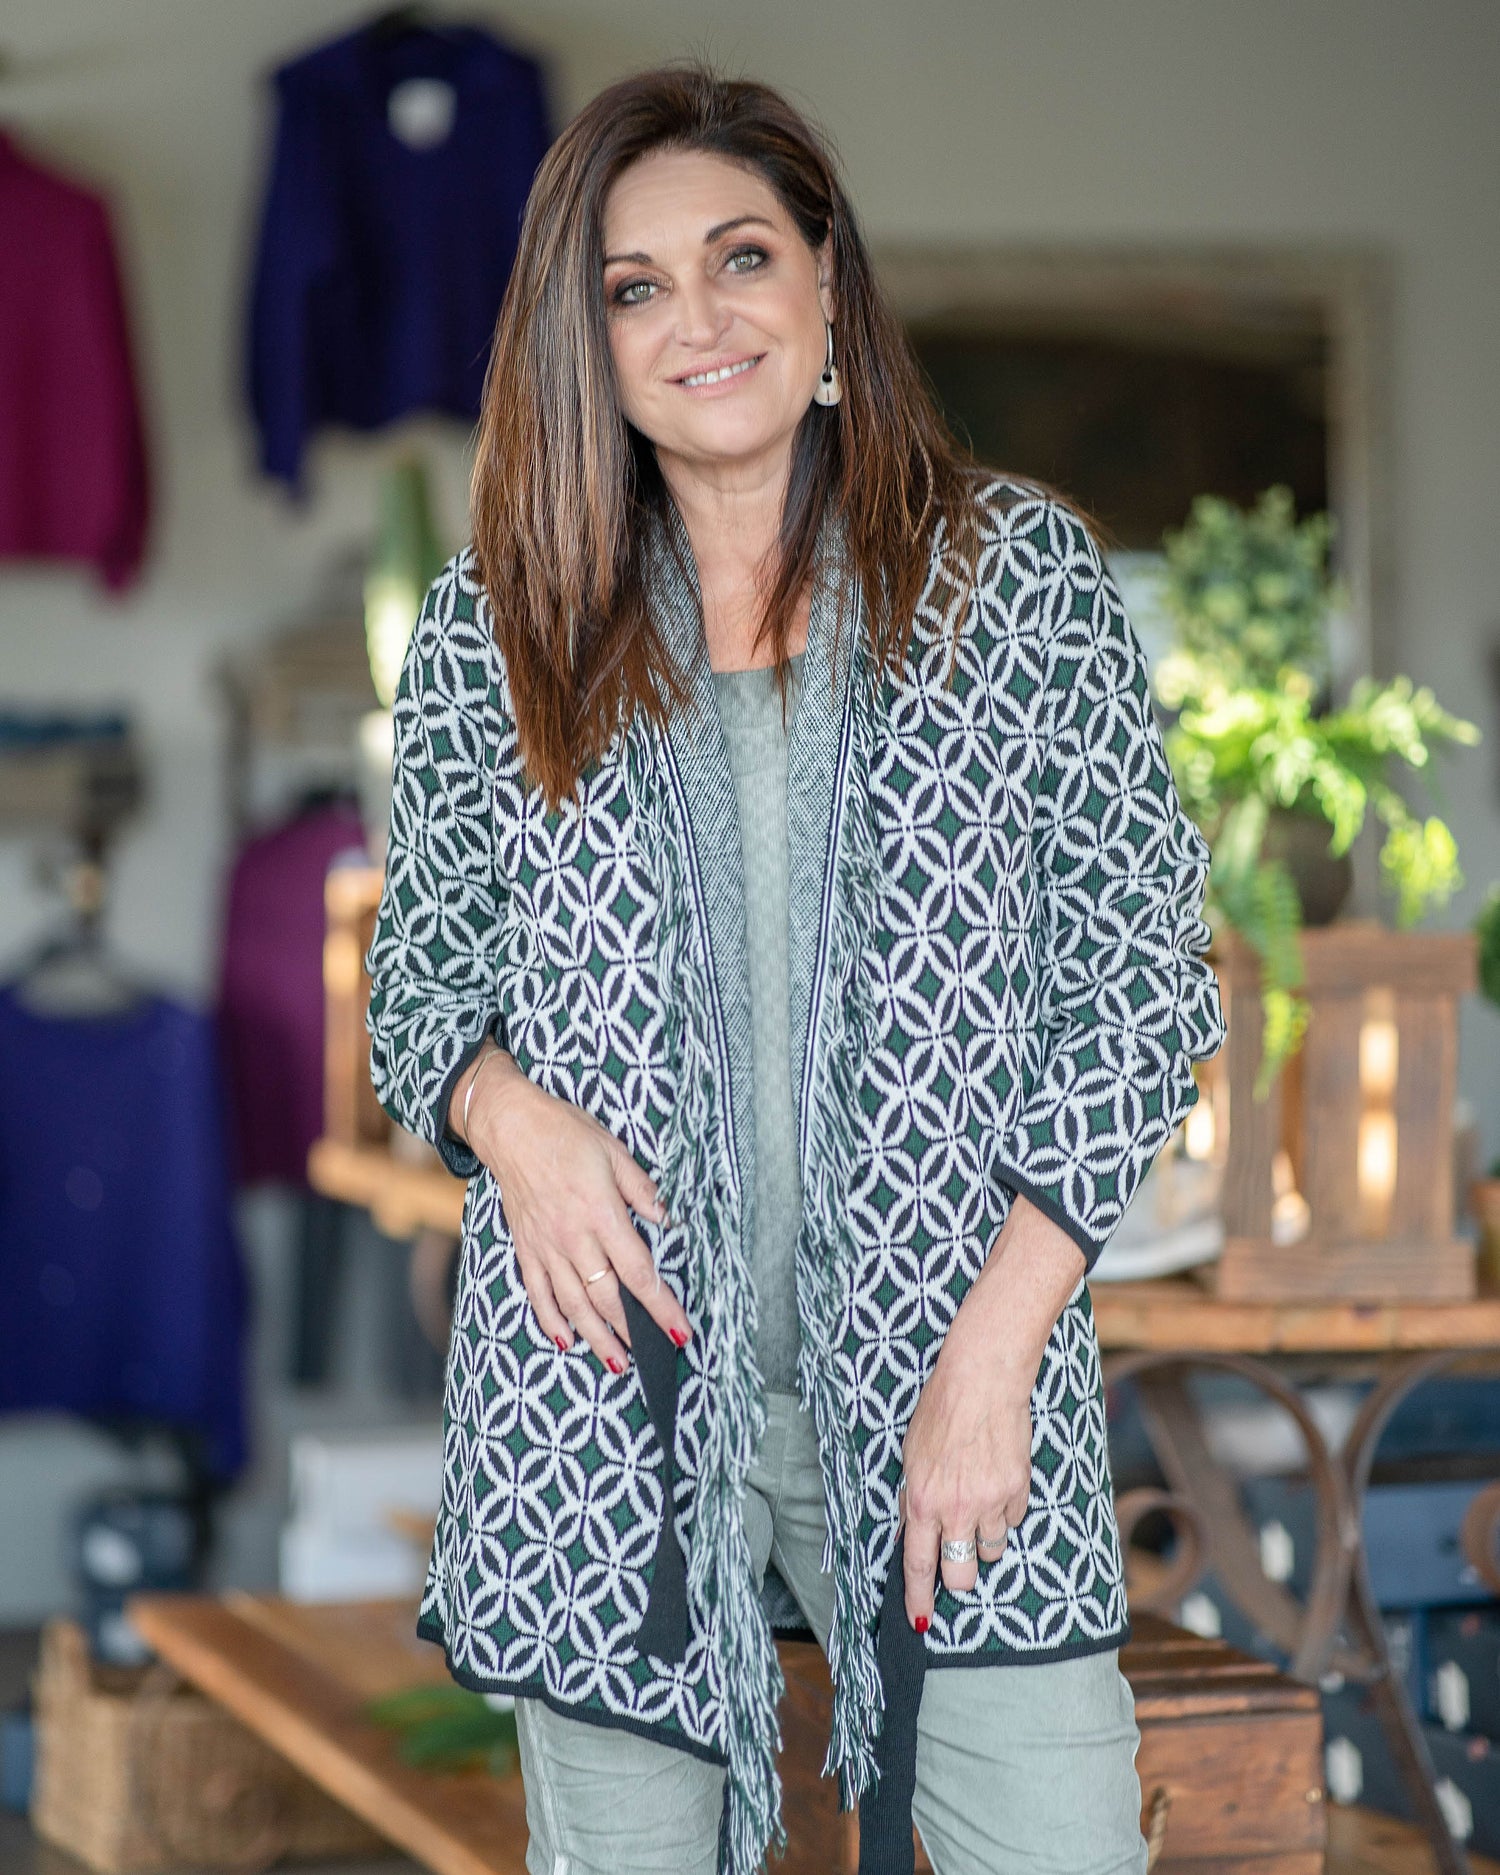 Once you try this poncho on - you wouldn't want to take it off! The colour scheme is vibrant and will easily pair with almost any outfit. The raw edge fringe detail adds so much sophistication to this look